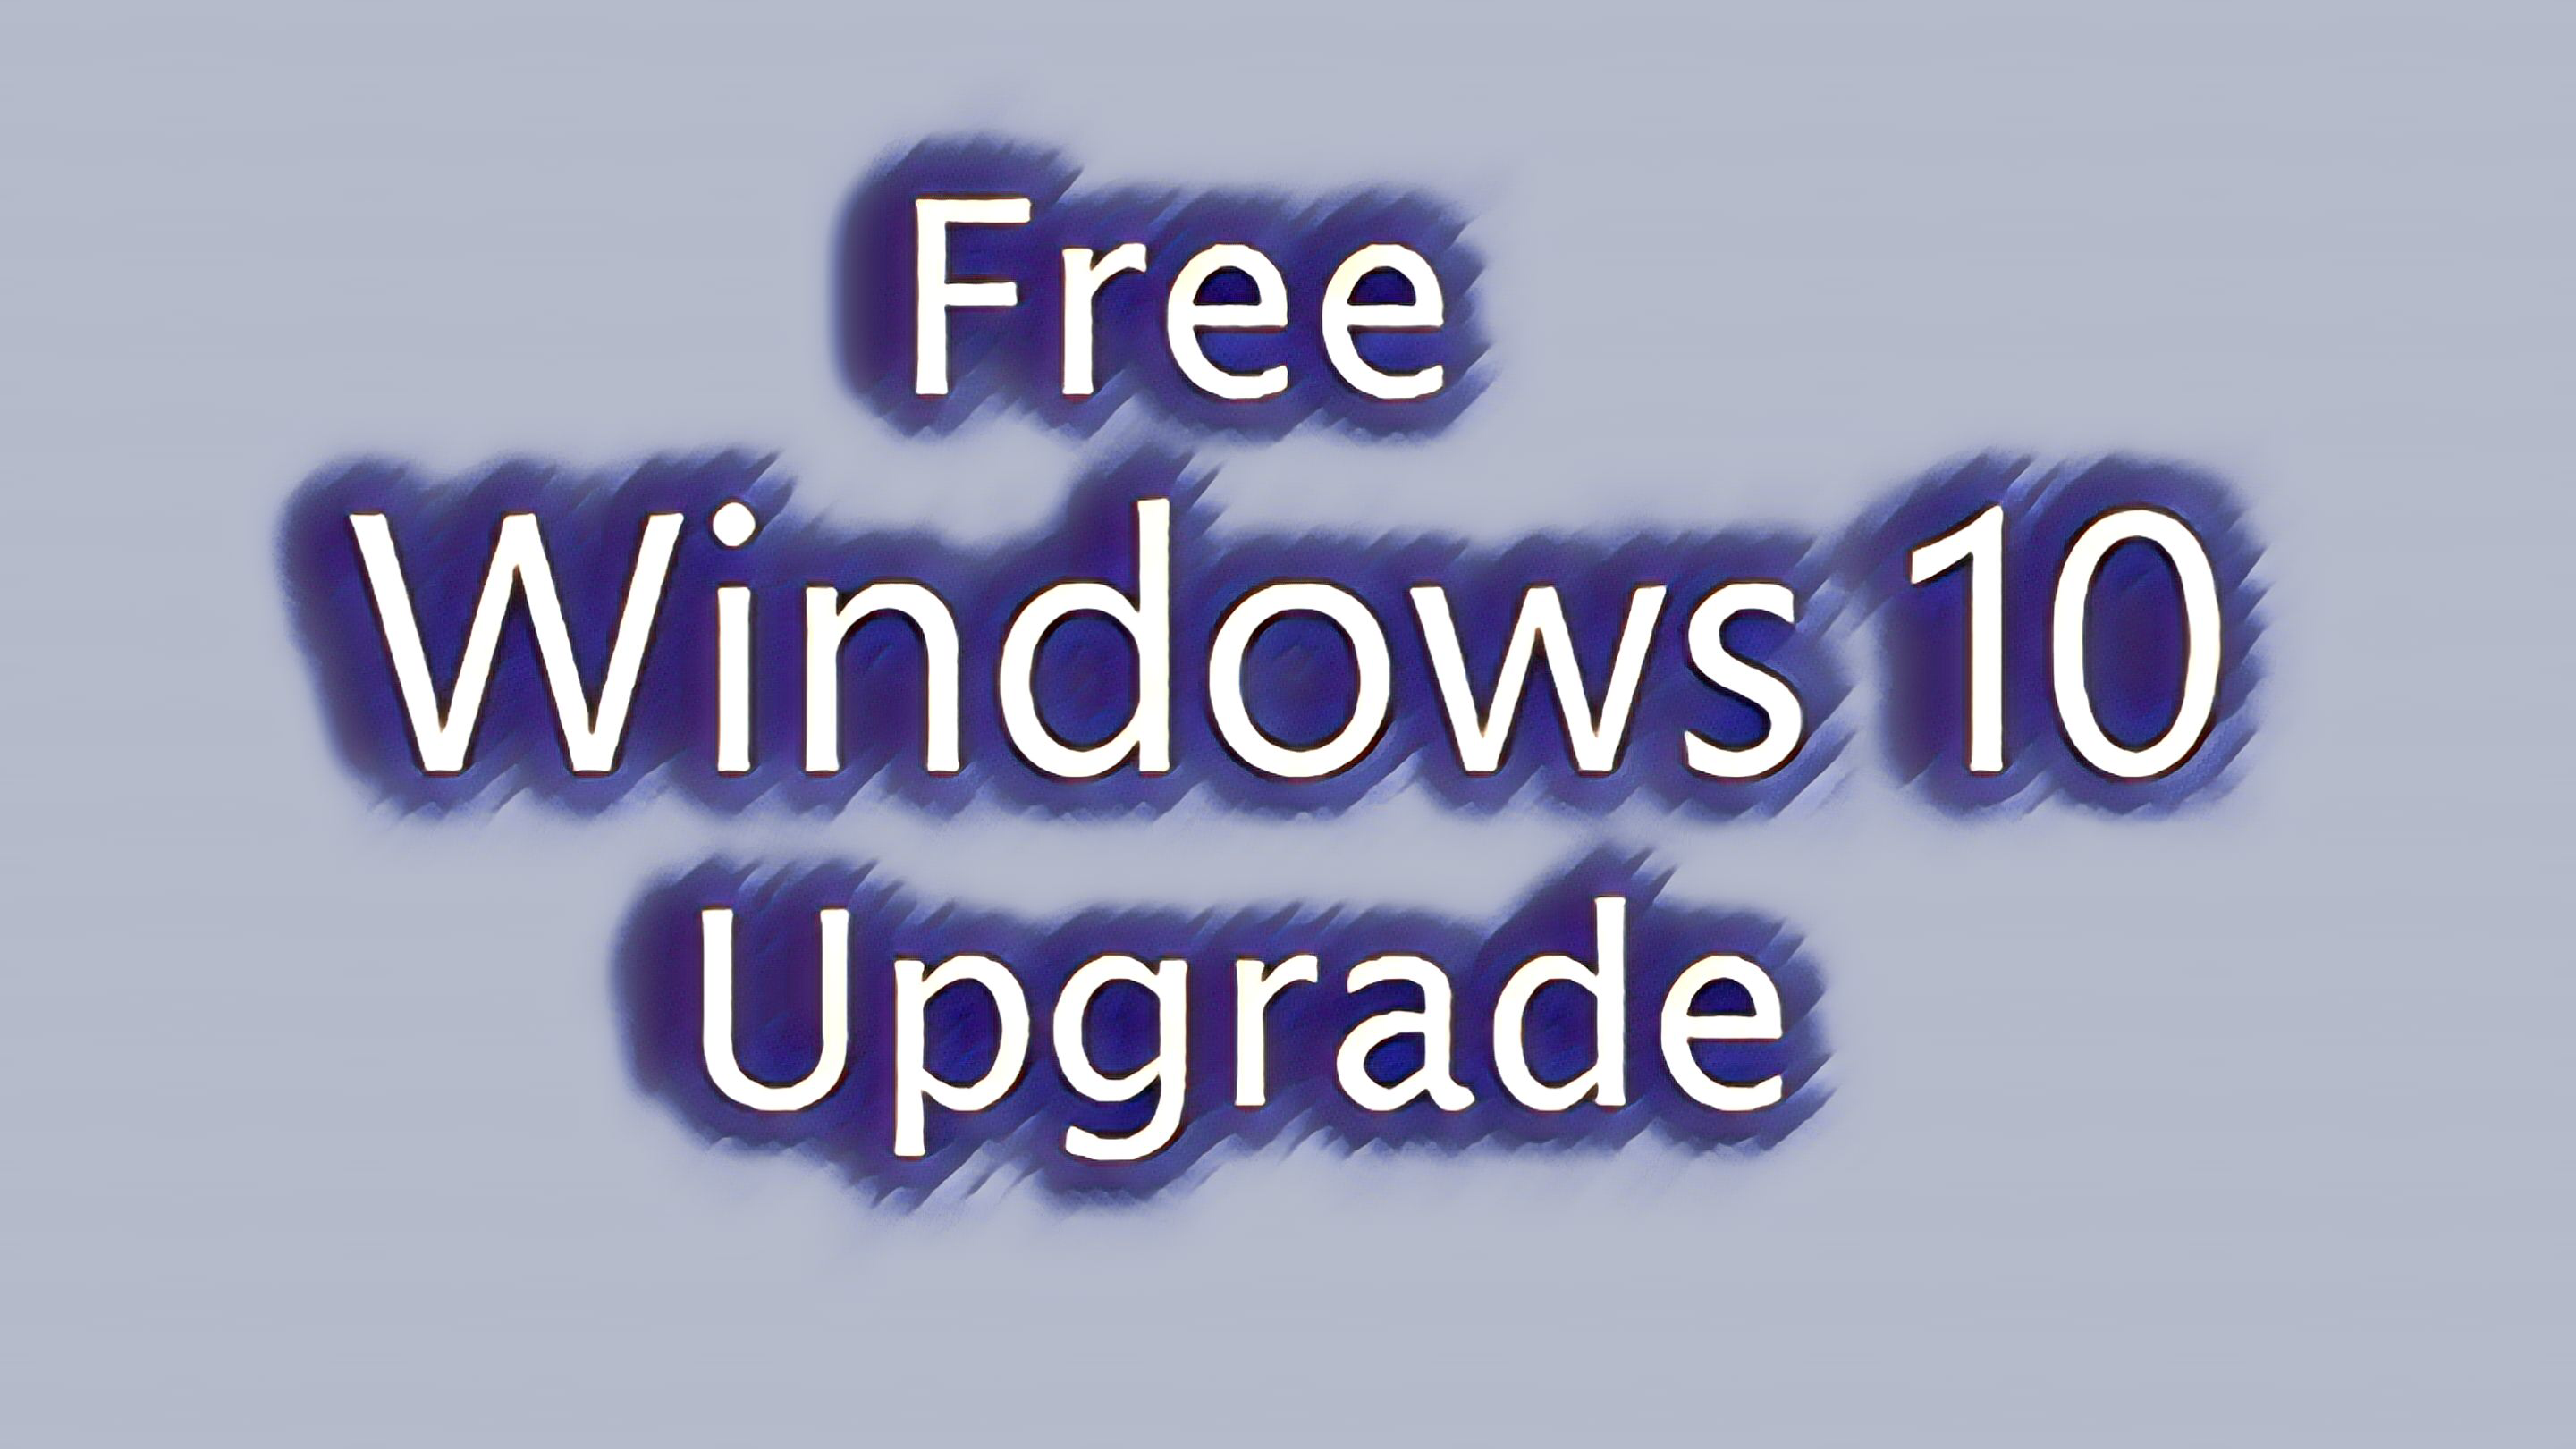 This free Windows 10 upgrade offer still works. Here's why and how to